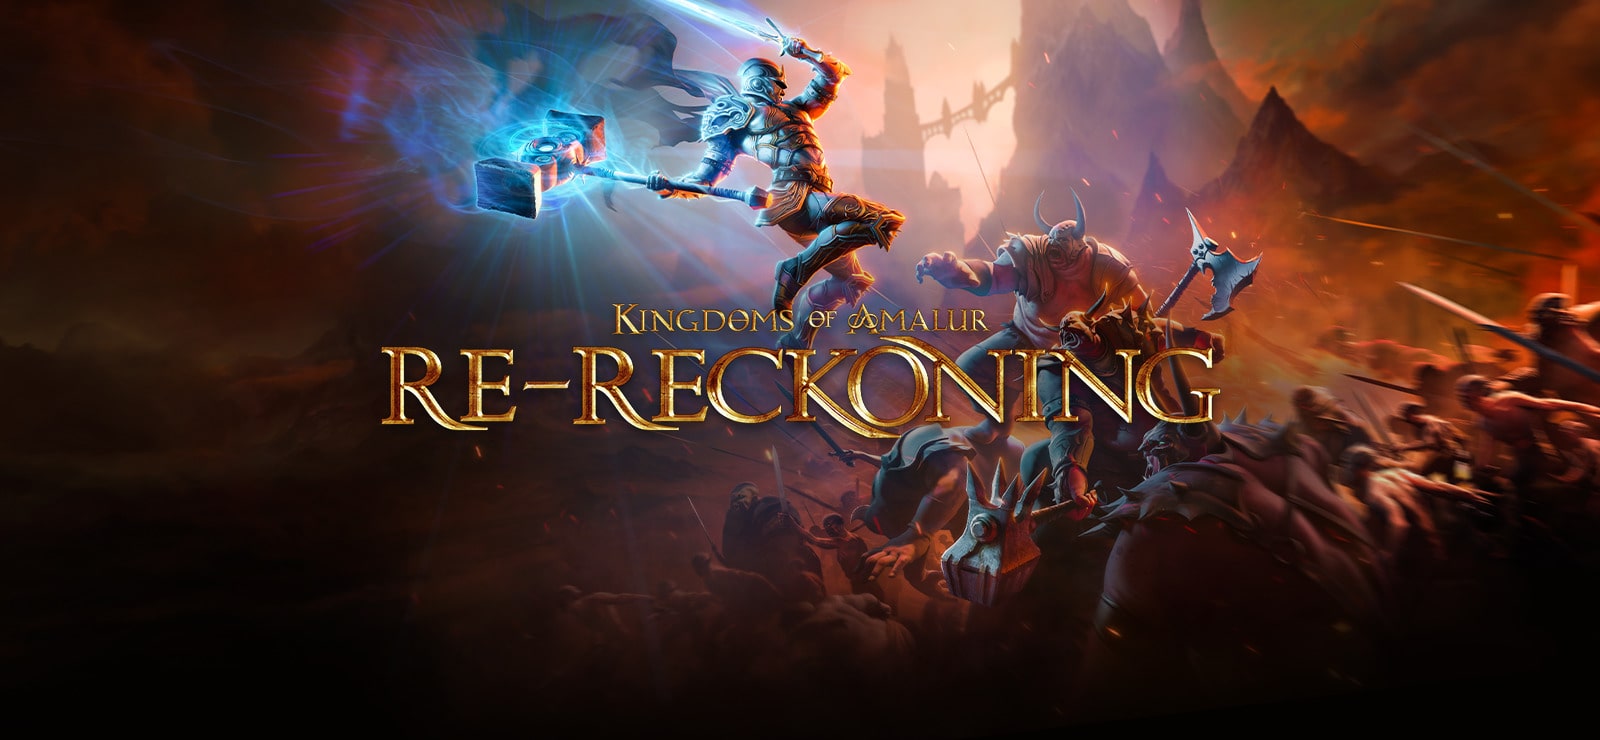 Kingdoms of Amalur Re-Reckoning FATE Edition PC Full Version